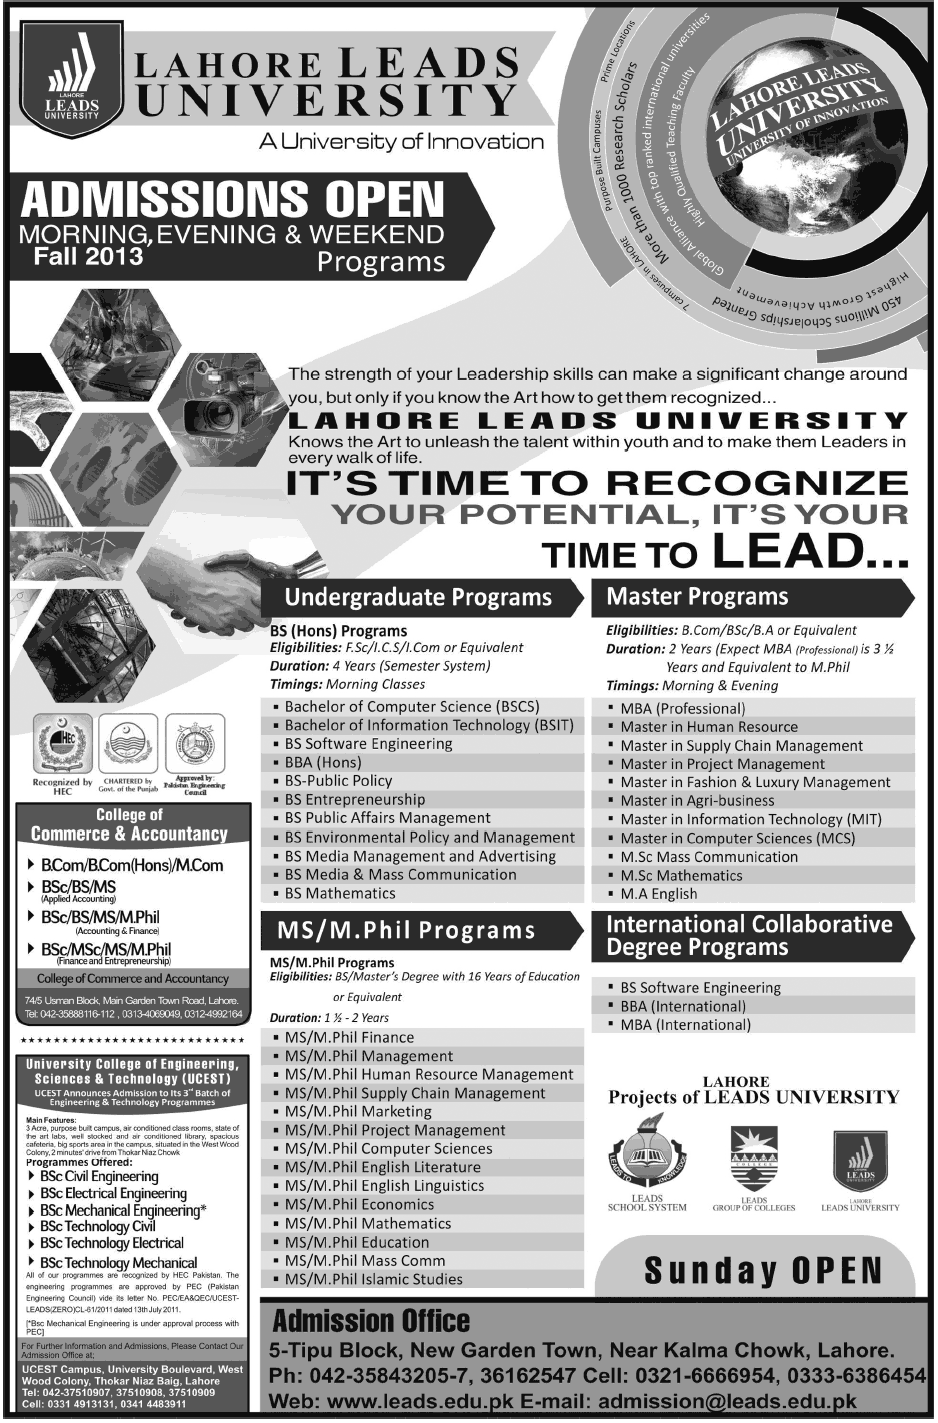 Lahore Leads University Admissions 2013